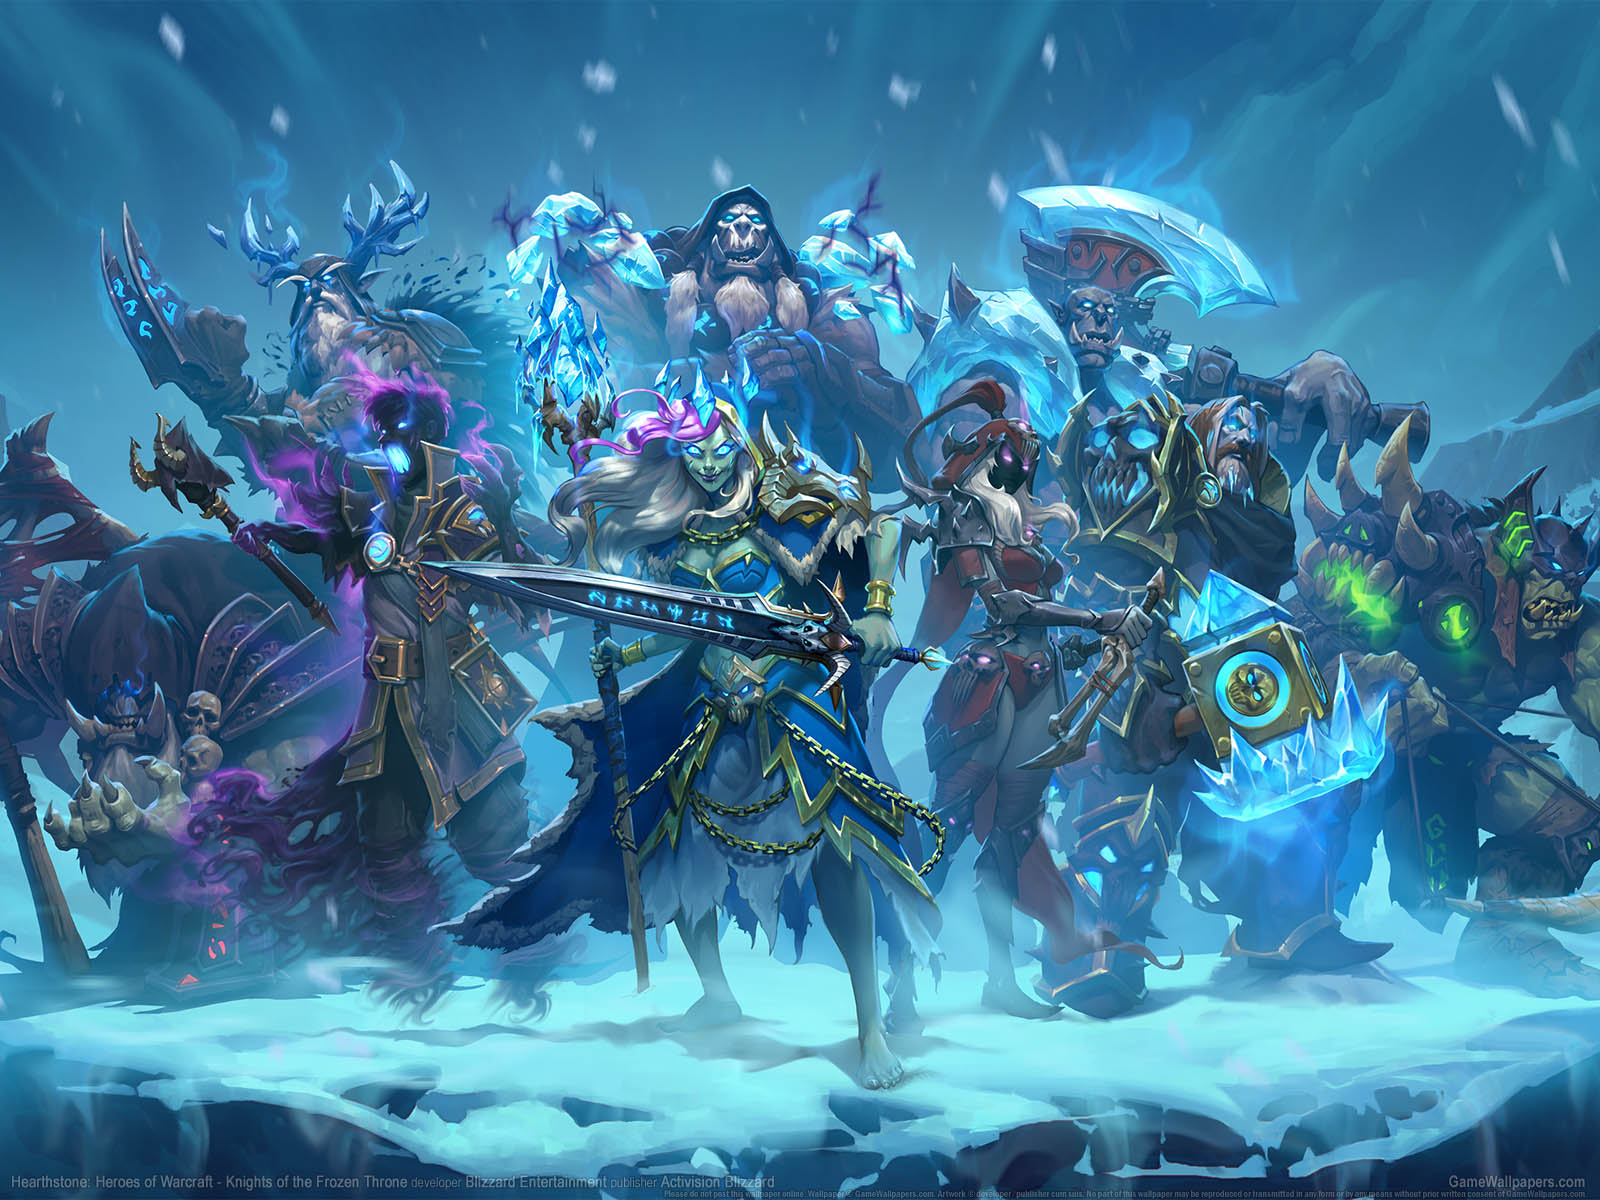 Hearthstone: Heroes of Warcraft - Knights of the Frozen Throneνmmer=02 fond d'cran  1600x1200